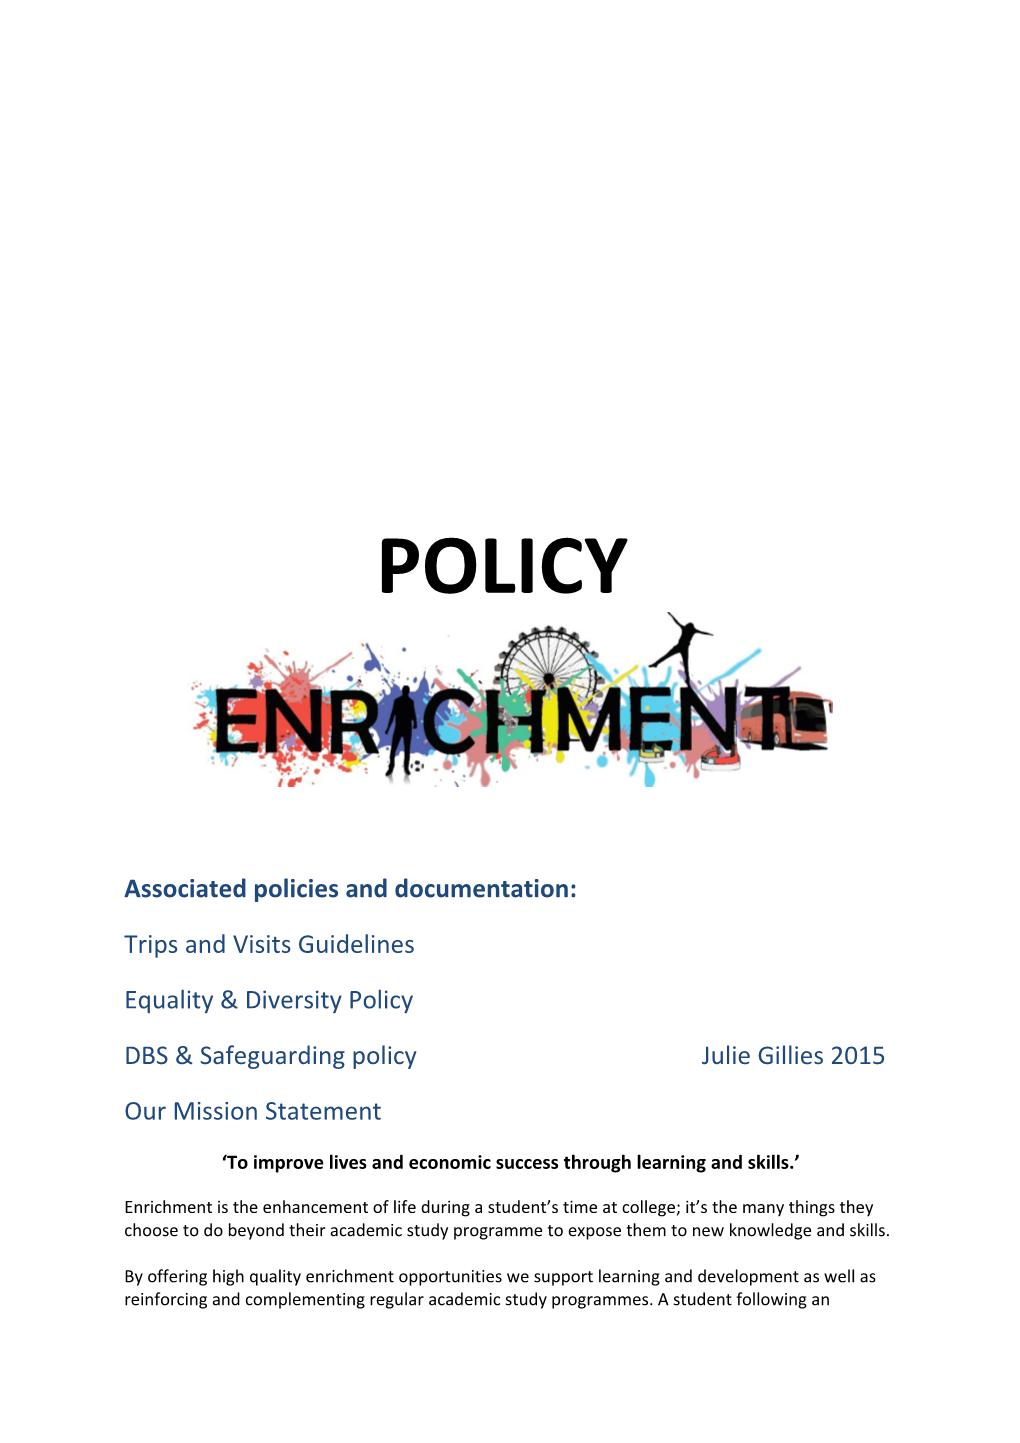 Associated Policies and Documentation